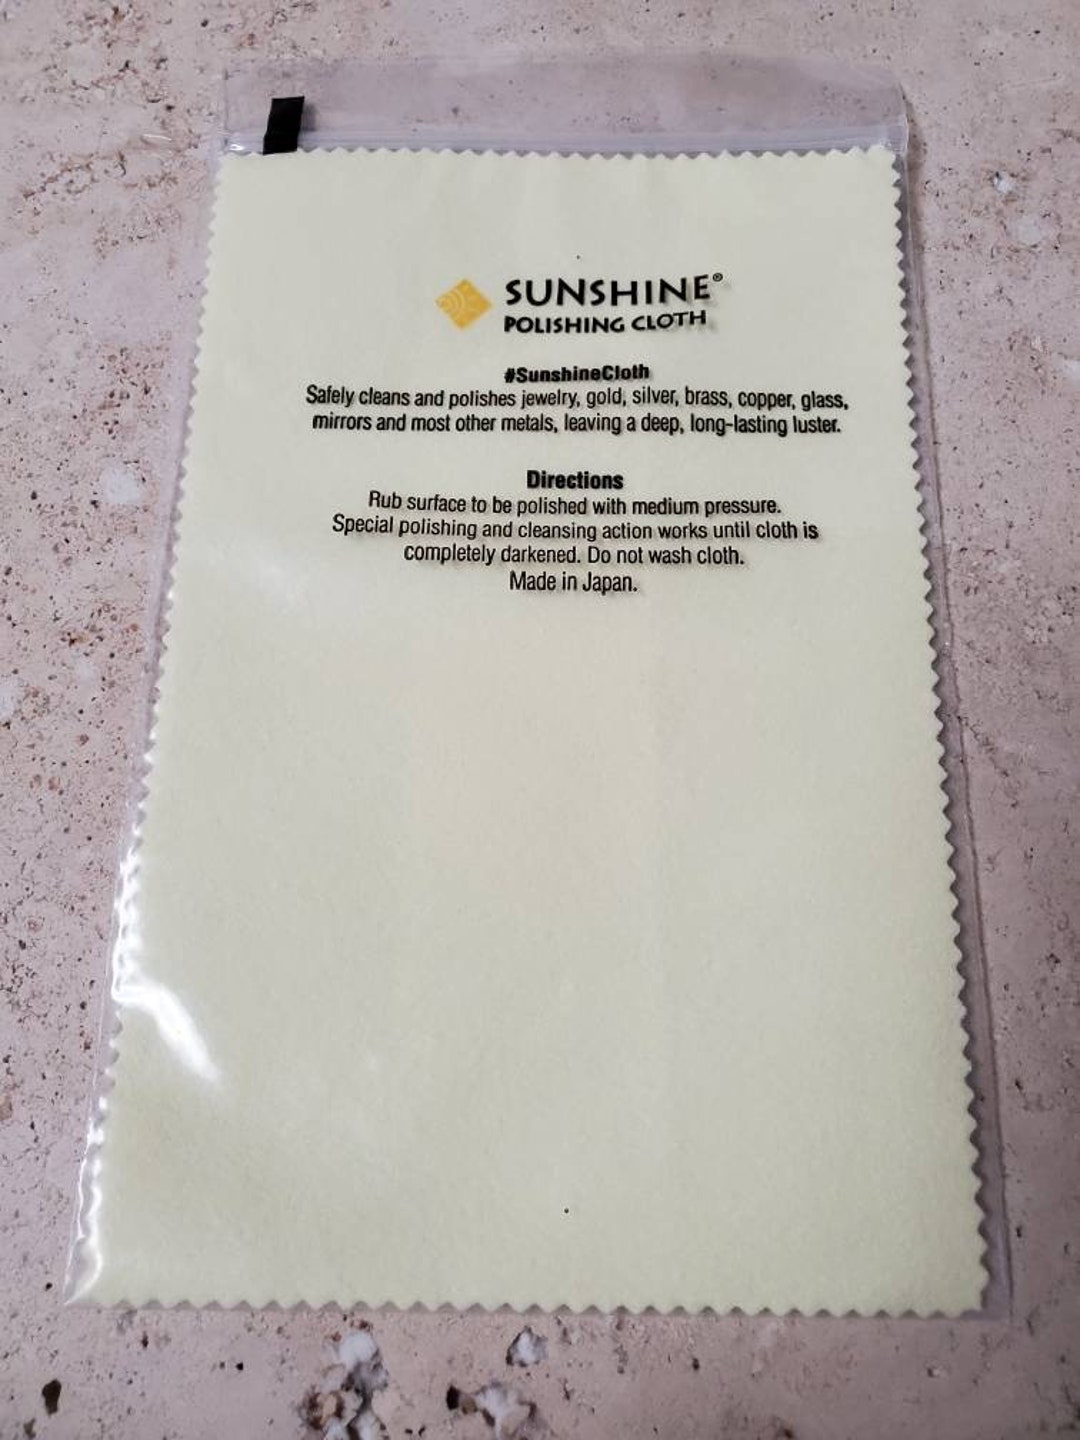 Sunshine 25 Polishing Cloths Jewelry Cleaner Tube Silver Brass Gold Copper